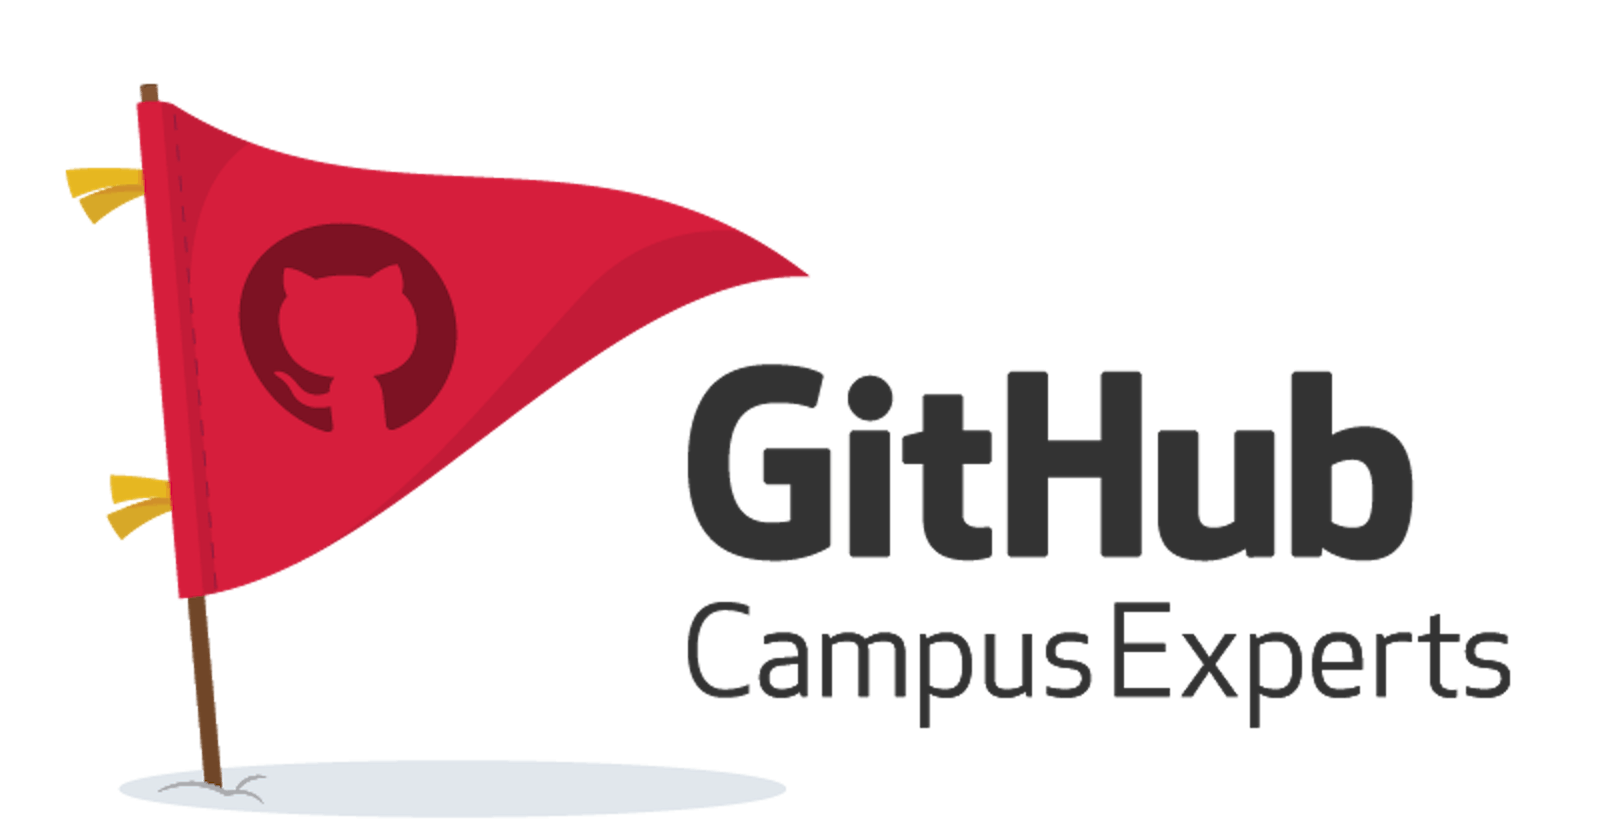 My GitHub Campus Expert 🚩 Application Process [SELECTED]